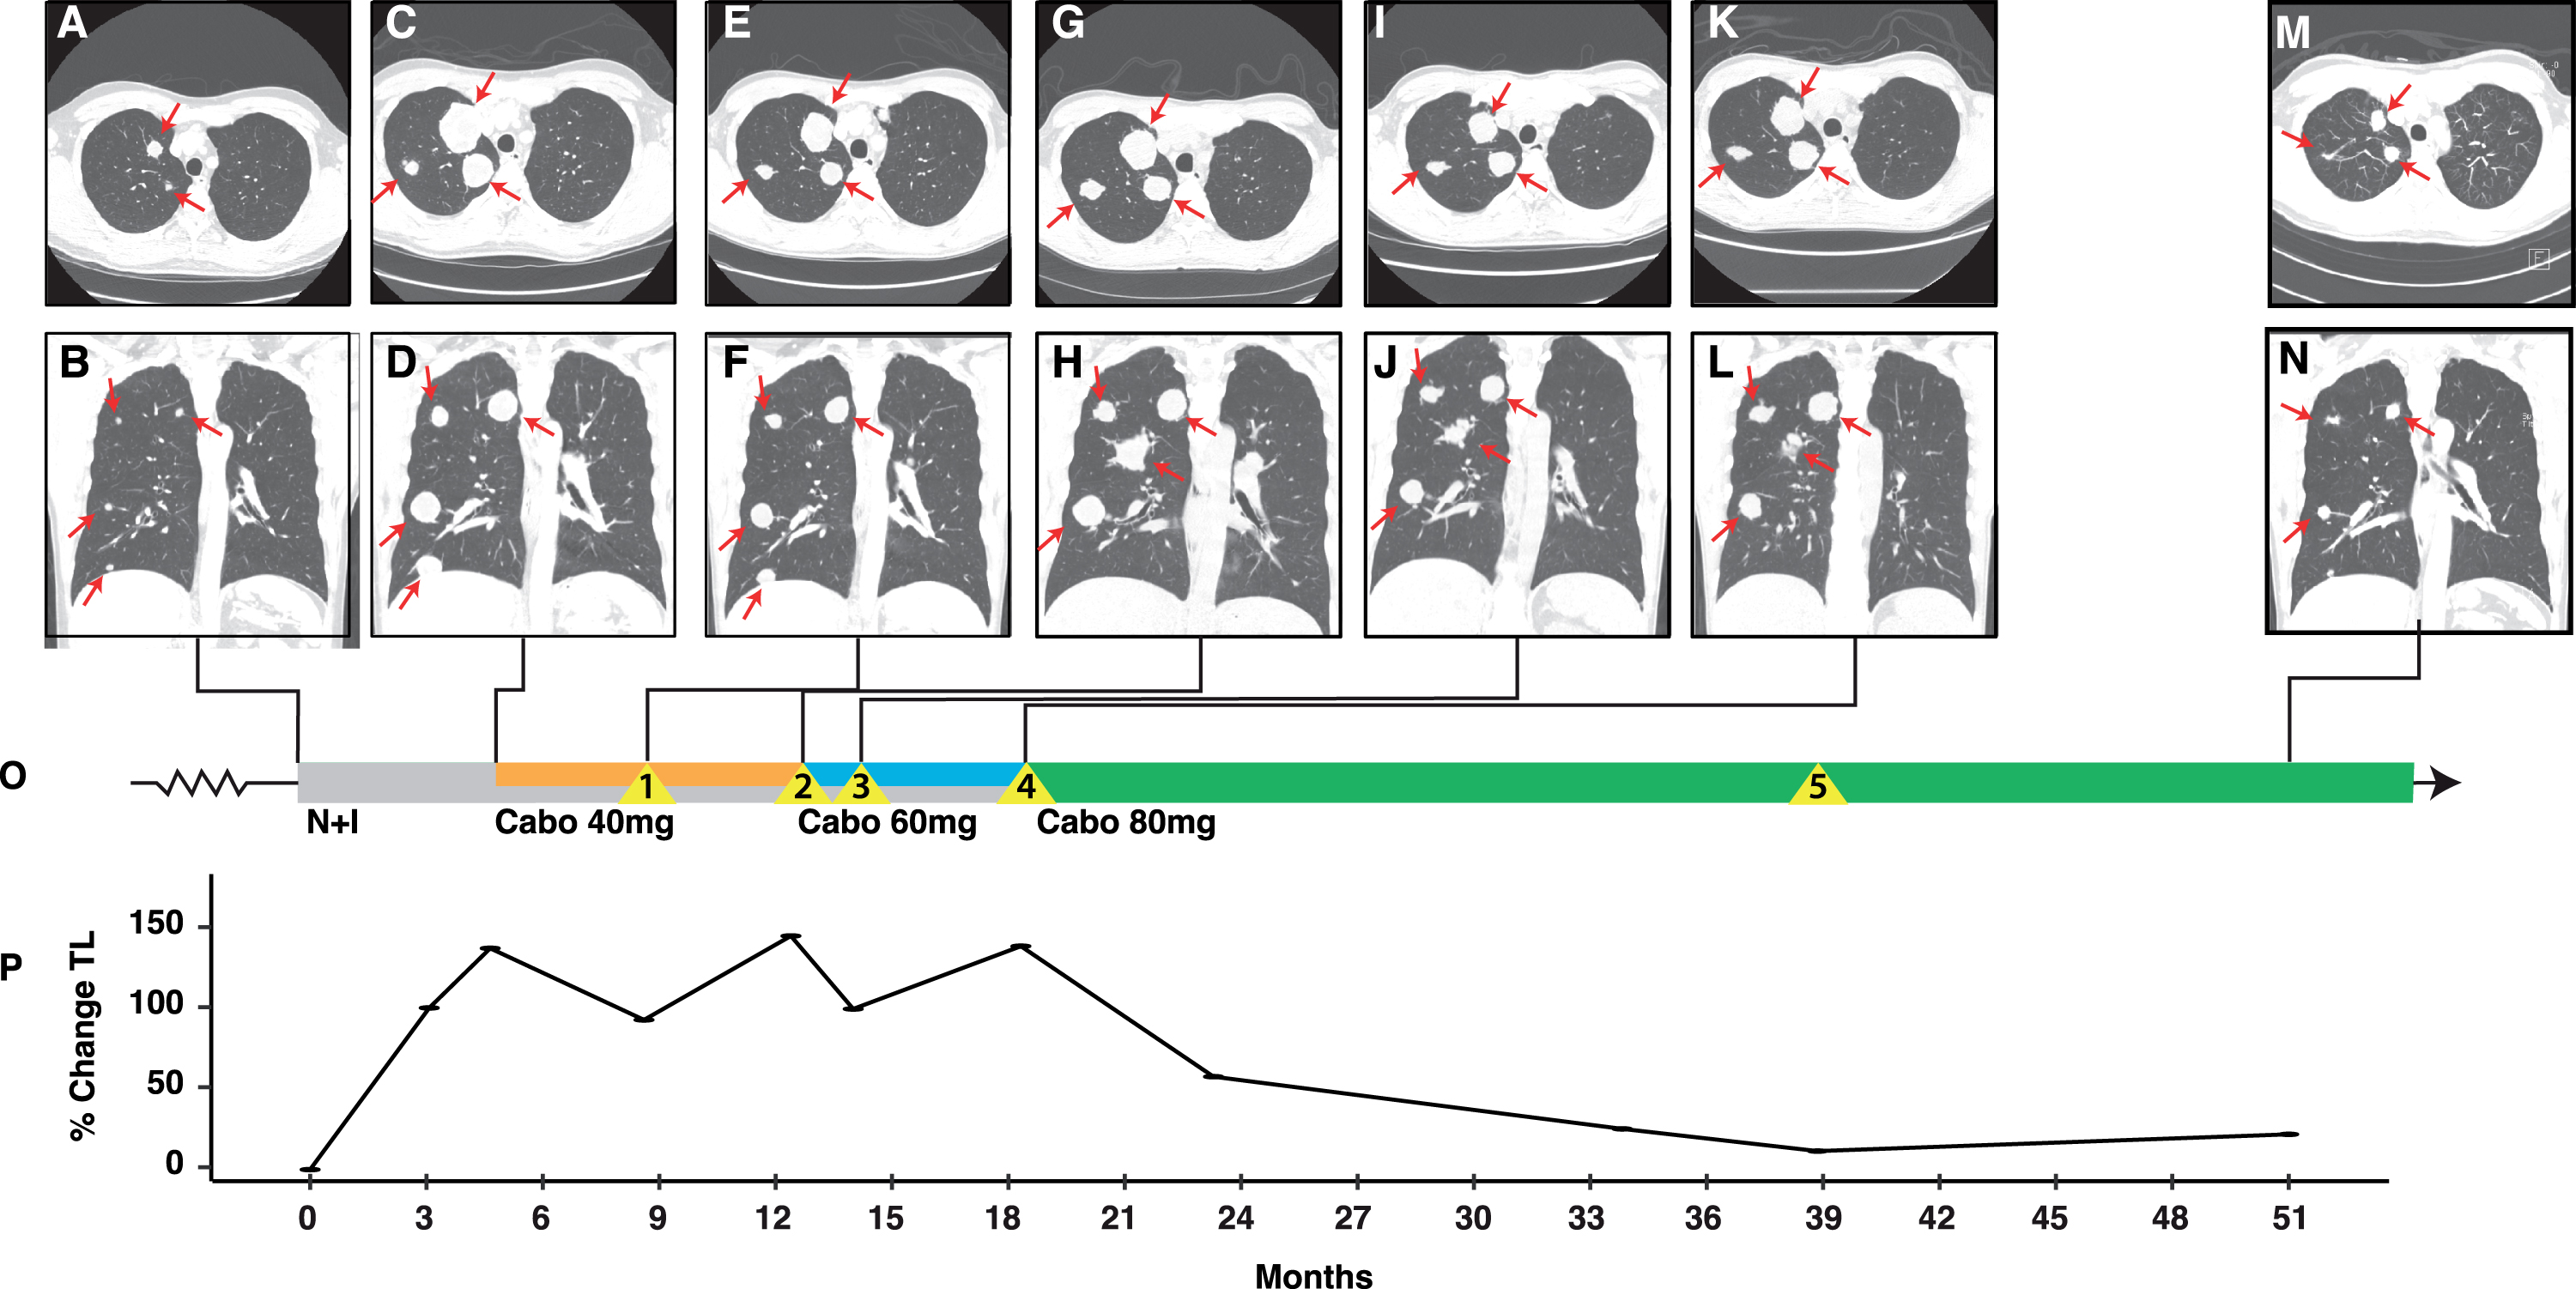 Integrated clinical overview containing key images, tumor burden, and treatment history for patient case 2. Representative lung lesions (red arrows) at key timepoints during the patient’s disease course including: At the start of N + I (A and B); at progression following 4 cycles of N + I with the addition of cabozantinib 40 mg to nivolumab (C and D); at time of initial response to nivolumab/cabozantinib 40 mg (E and F); at time of progression with new brain lesions and transition to nivolumab/cabozantinib 60 mg (G and H); after initial response to nivolumab/cabozantinib 60 mg (I and J); at the time of acquired resistance with development of new brain lesion (K and L); and after prolonged therapy on cabozantinib 80 mg (M and N). Radiographic images are integrated into the treatment timeline (O) which depicts systemic therapies (N + I in grey; cabo 40 mg in orange; cabo 60 mg in blue; and cabo 80 mg in green), and clinical events (yellow triangles). The proportional change in tumor burden, reported as the sum of the longest diameters of target lesions is depicted in (P). Events: 1, isolated progression in a gluteal mass which was surgically resected; 2, development of two new brain metastases treated with gamma-knife (GK); 3, isolated progression of two hepatic metastases which were treated with SBRT; 4, new brain metastasis treated with GK; 5, recurrence of resected gluteal metastasis treated with consolidative SBRT. Abbreviations: Cabo, cabozantinib; N + I, nivolumab and ipilimumab; TL, target lesion.